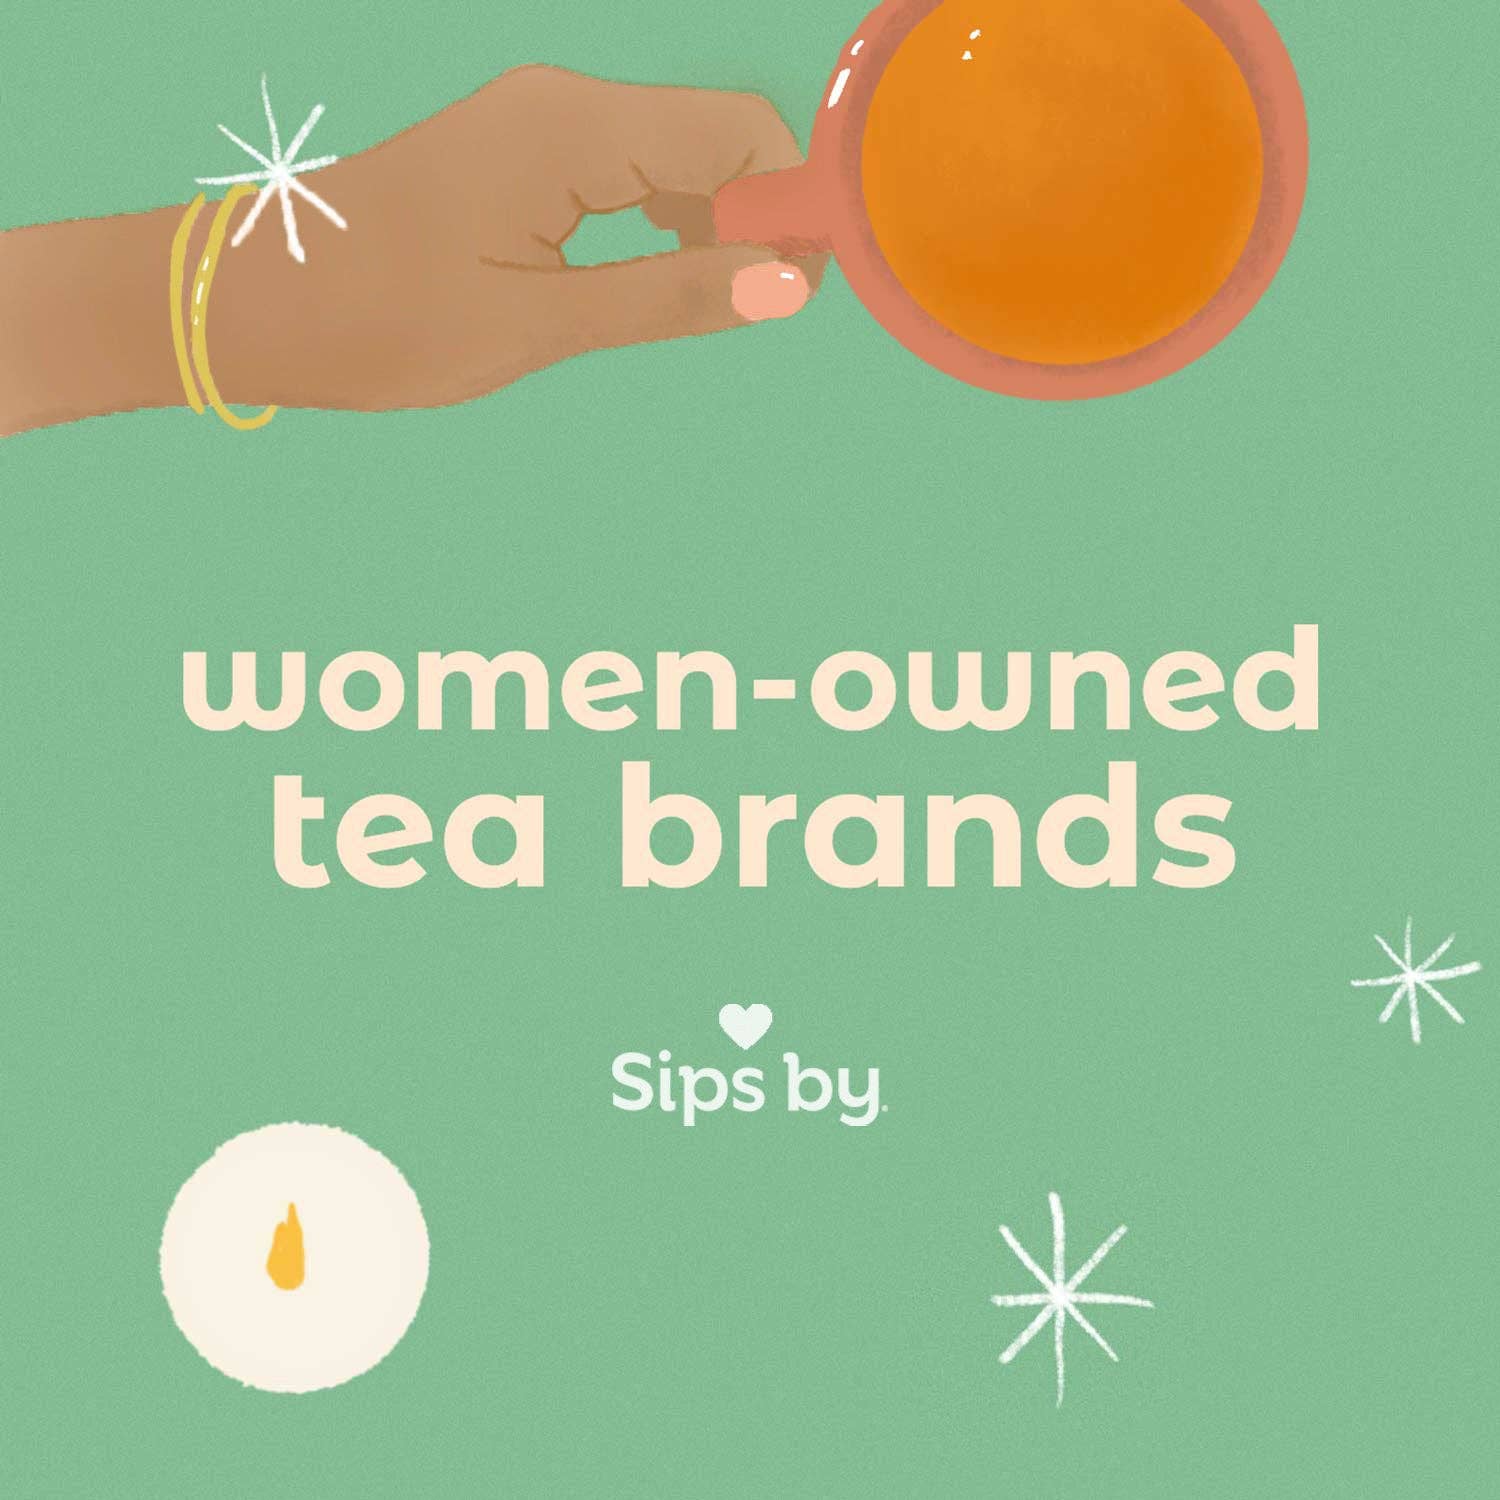 Green women-owned tea brands illustration with a hand holding a cup of tea and the Sips by tea heart logo